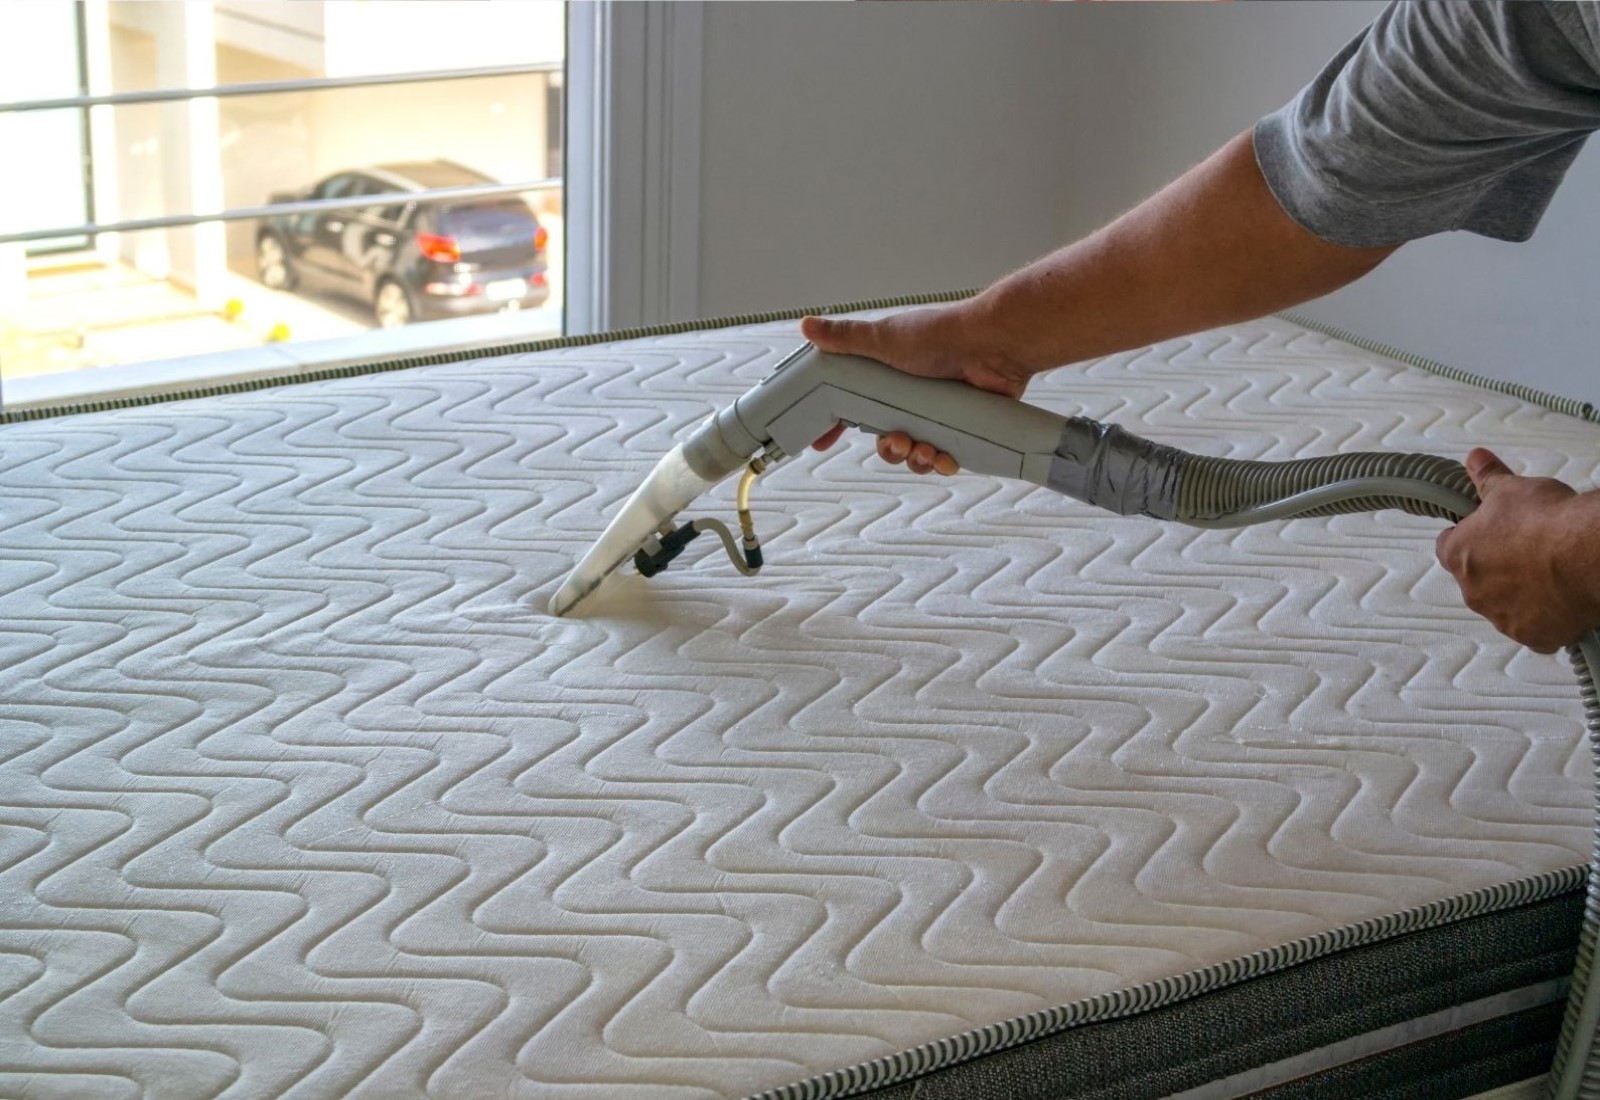 Commercial Mattress Cleaning Sanitizing 